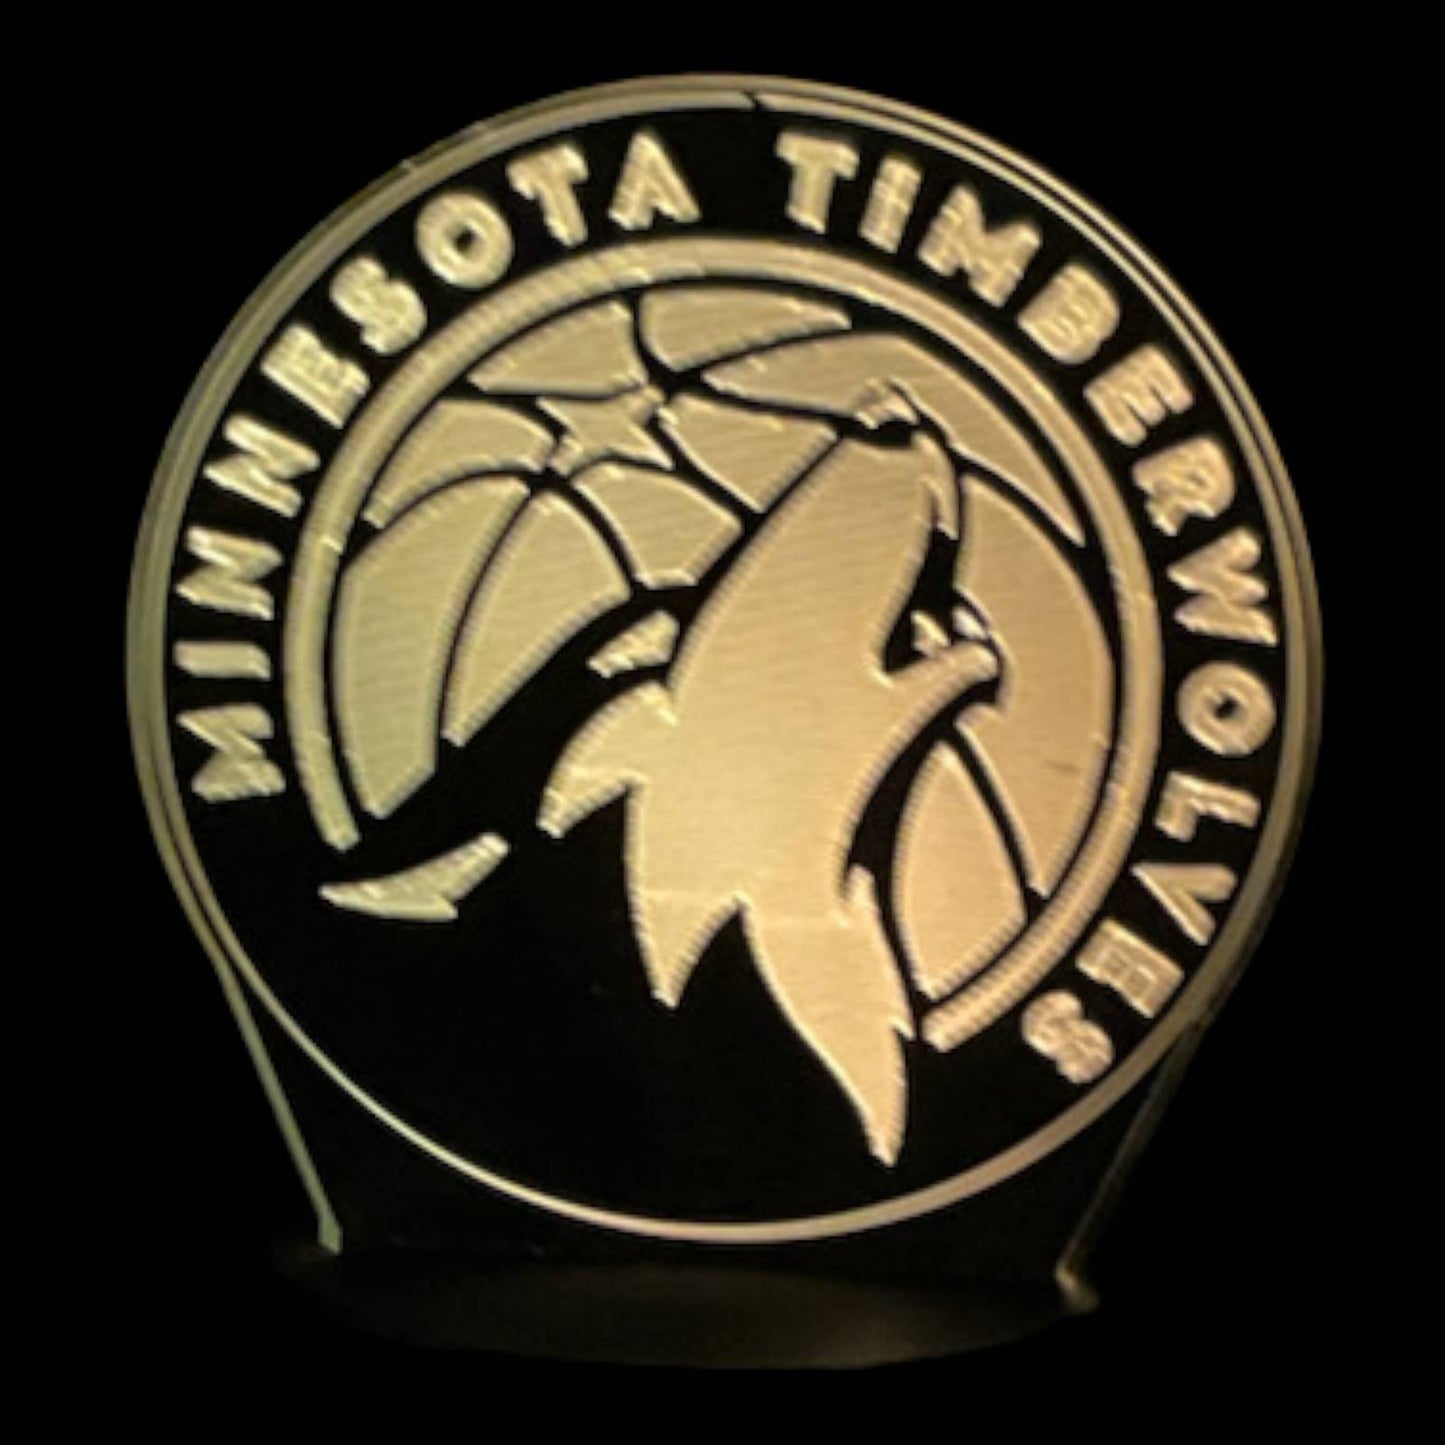 Minnesota Timberwolves 3D LED Night-Light 7 Color Changing Lamp w/ Touch Switch